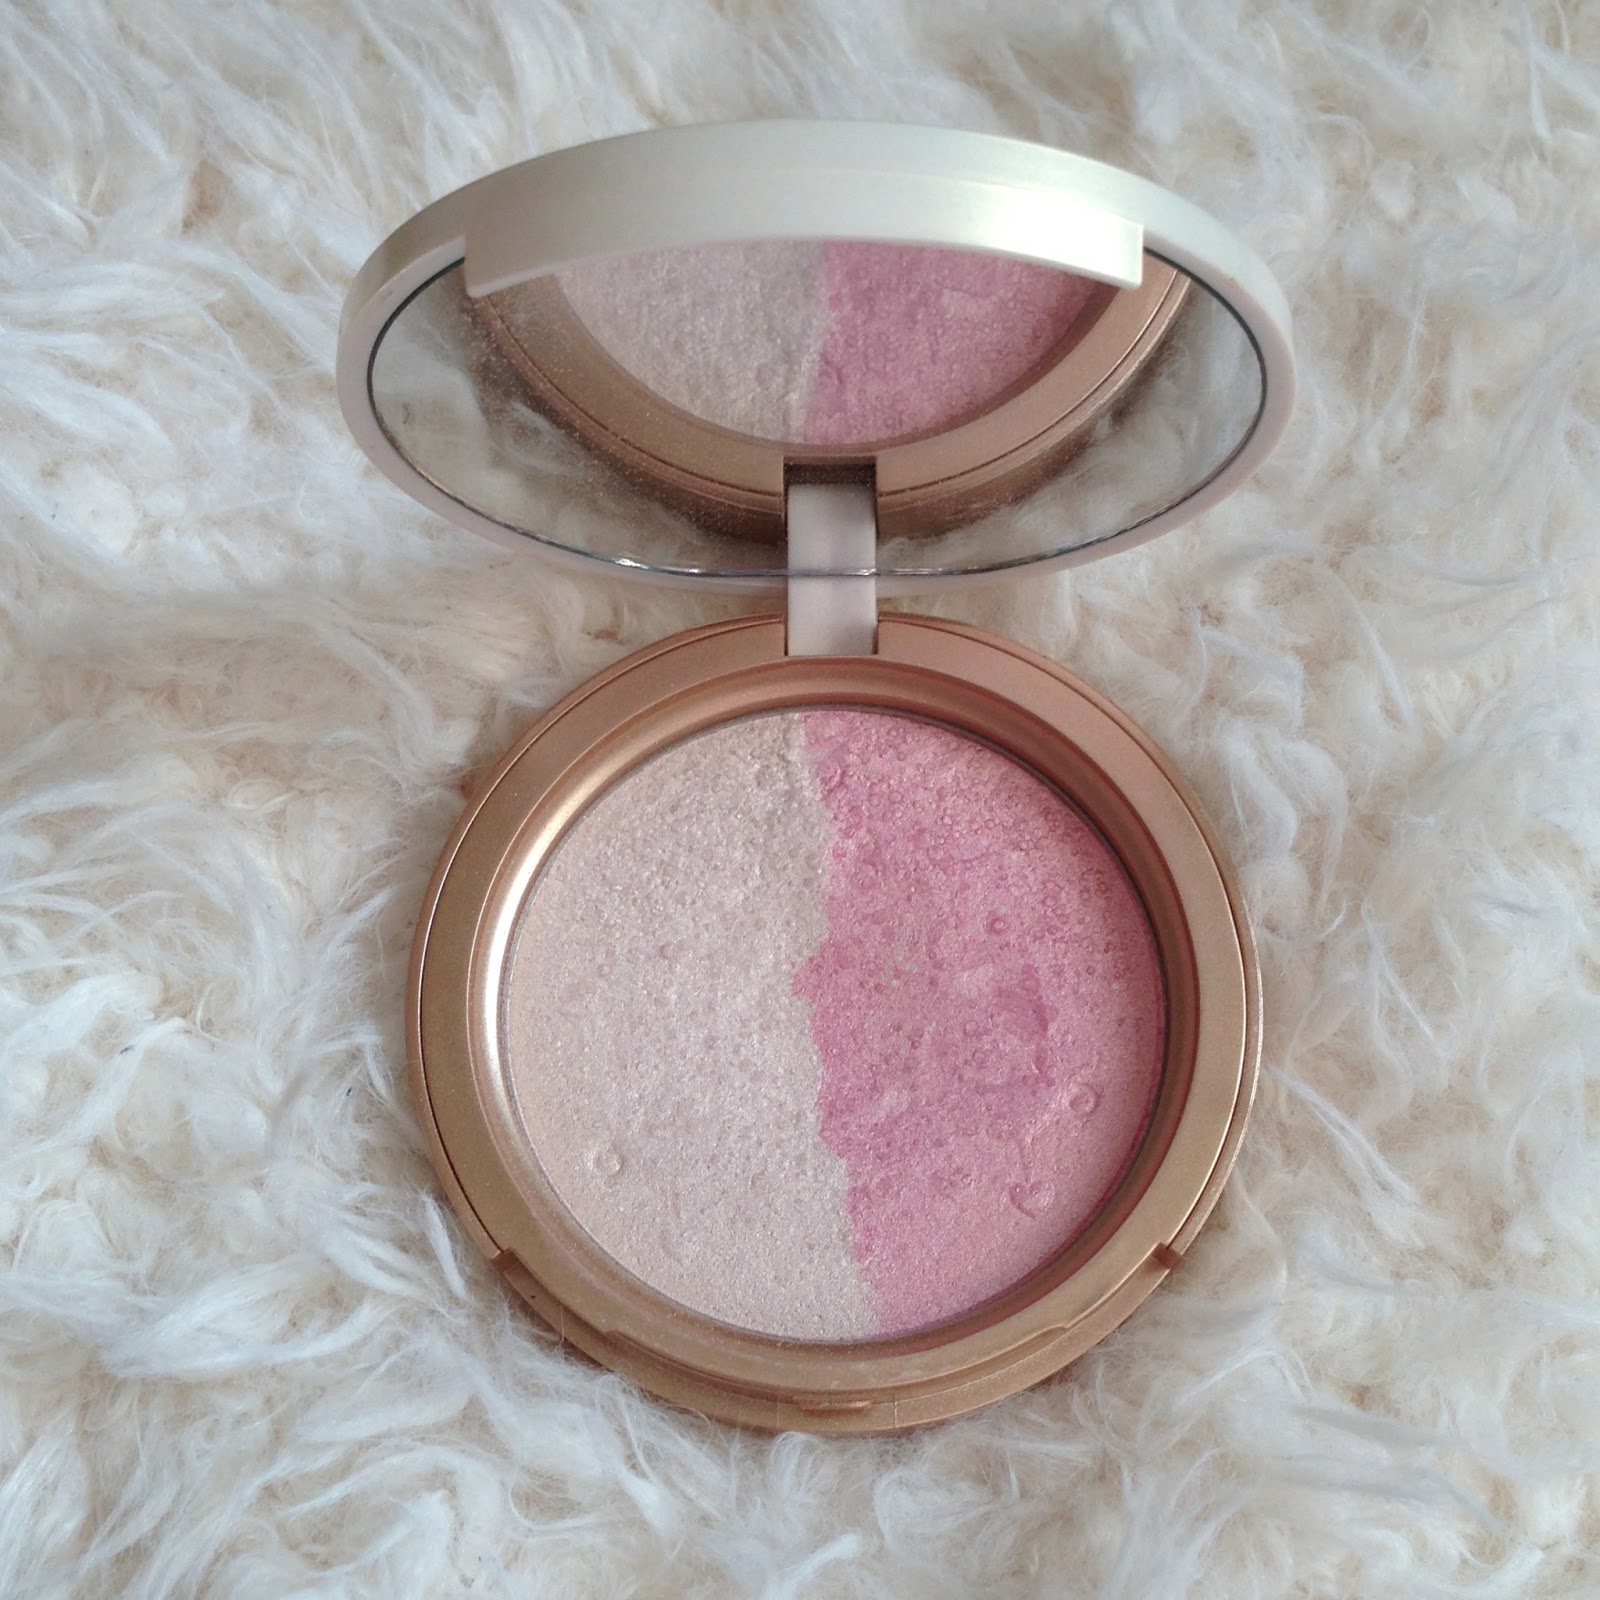 Candlelight Glow Highlighting Powder Duo - Too Faced Sephora